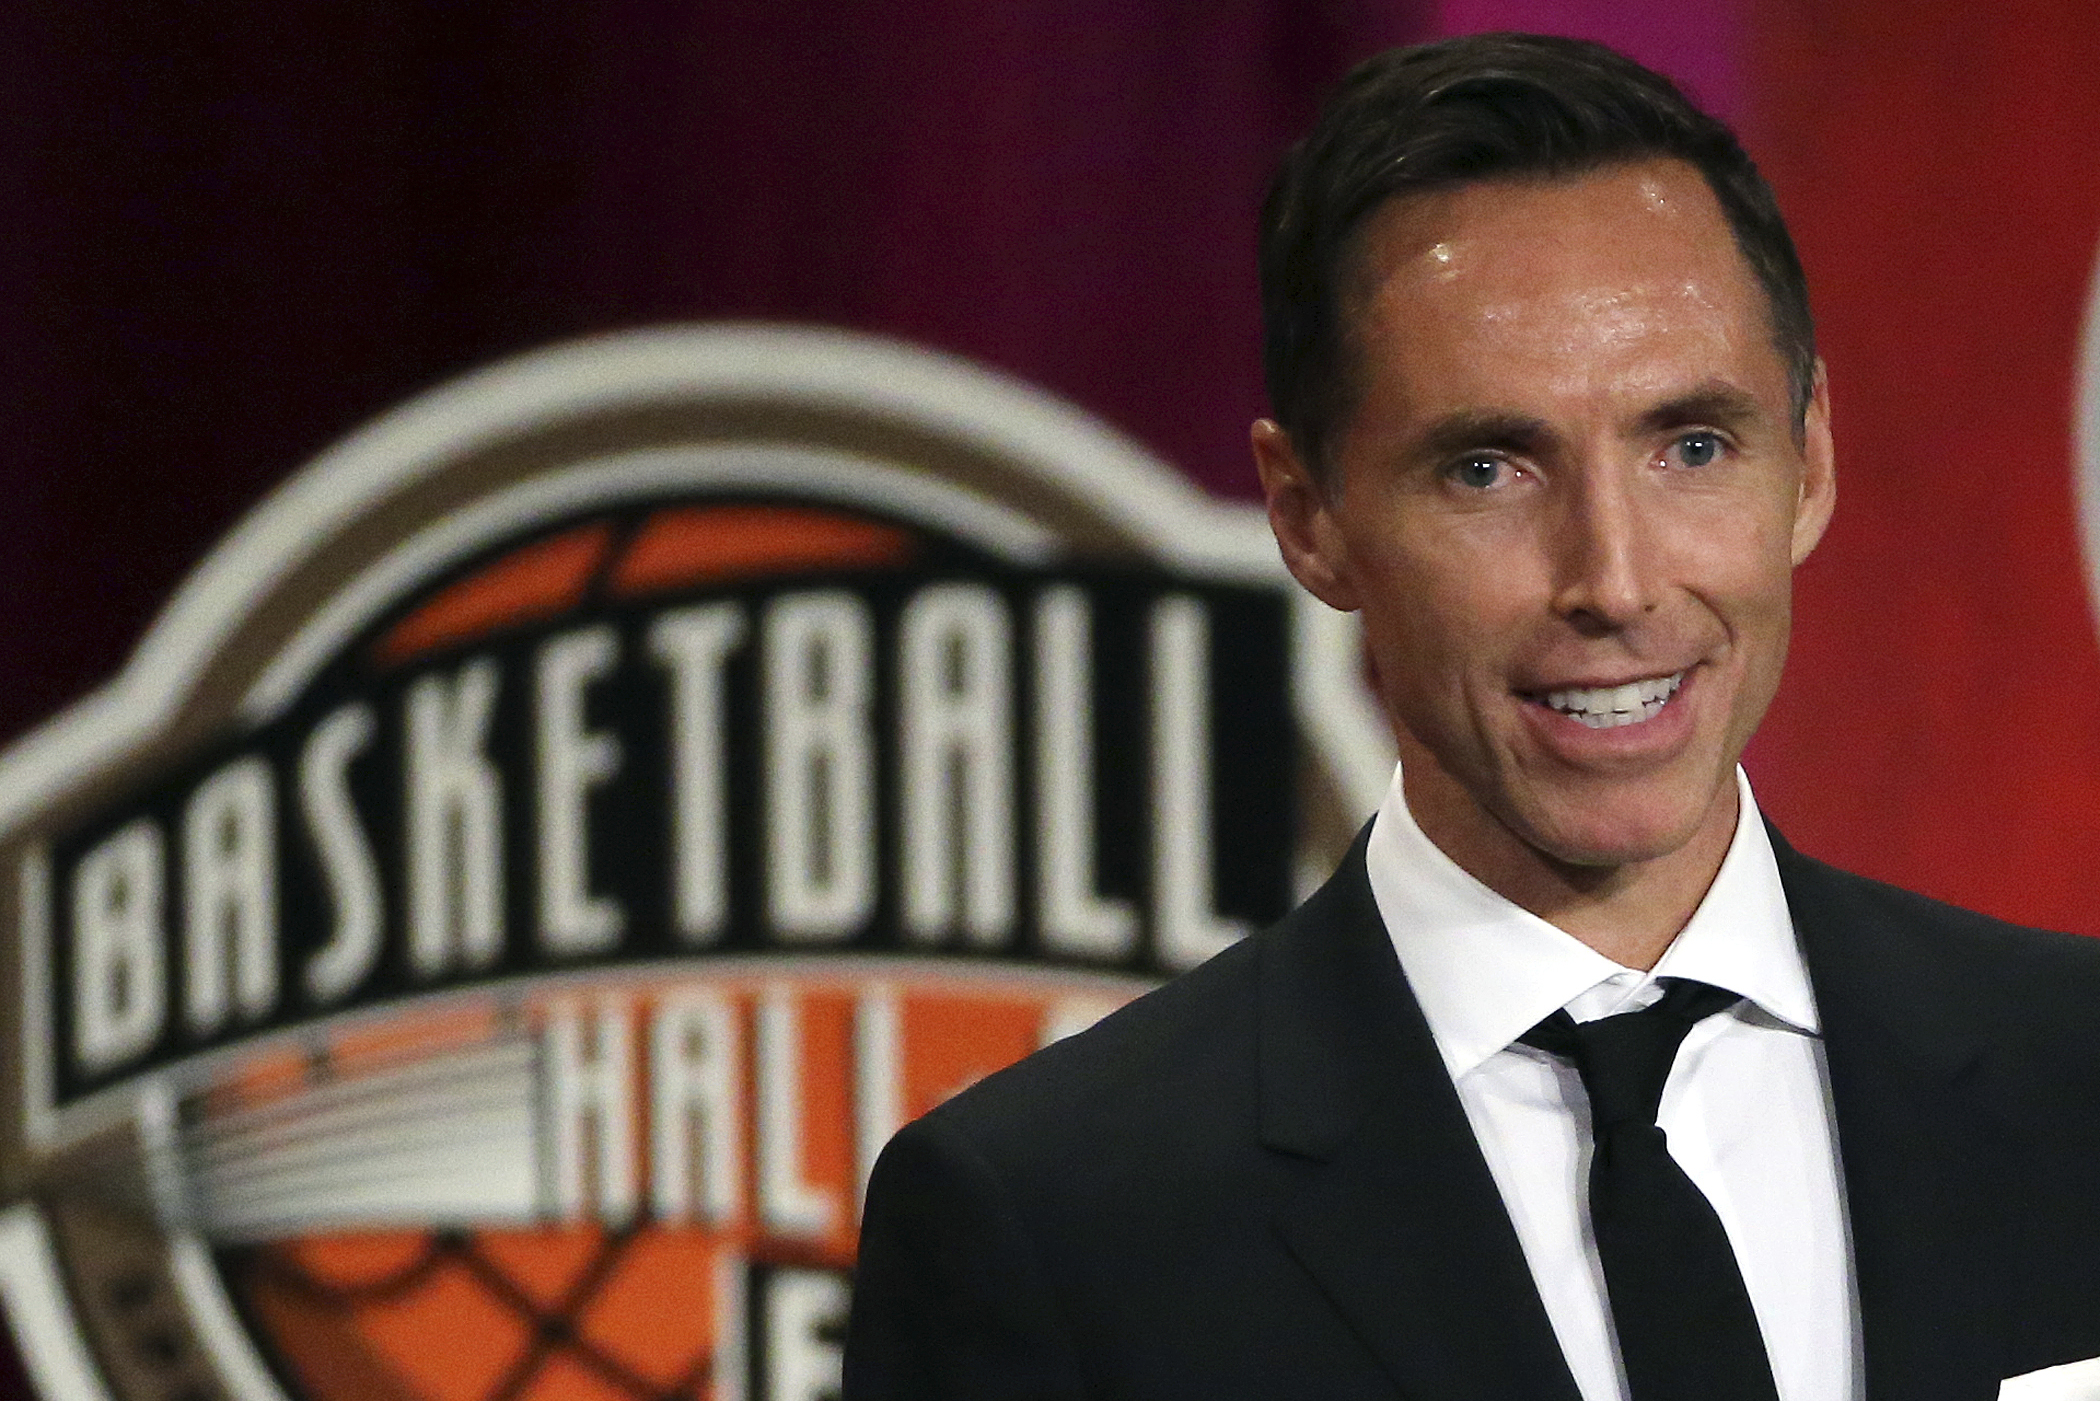 Steve Nash: “I don't care,” about Kyrie's interactions with fans